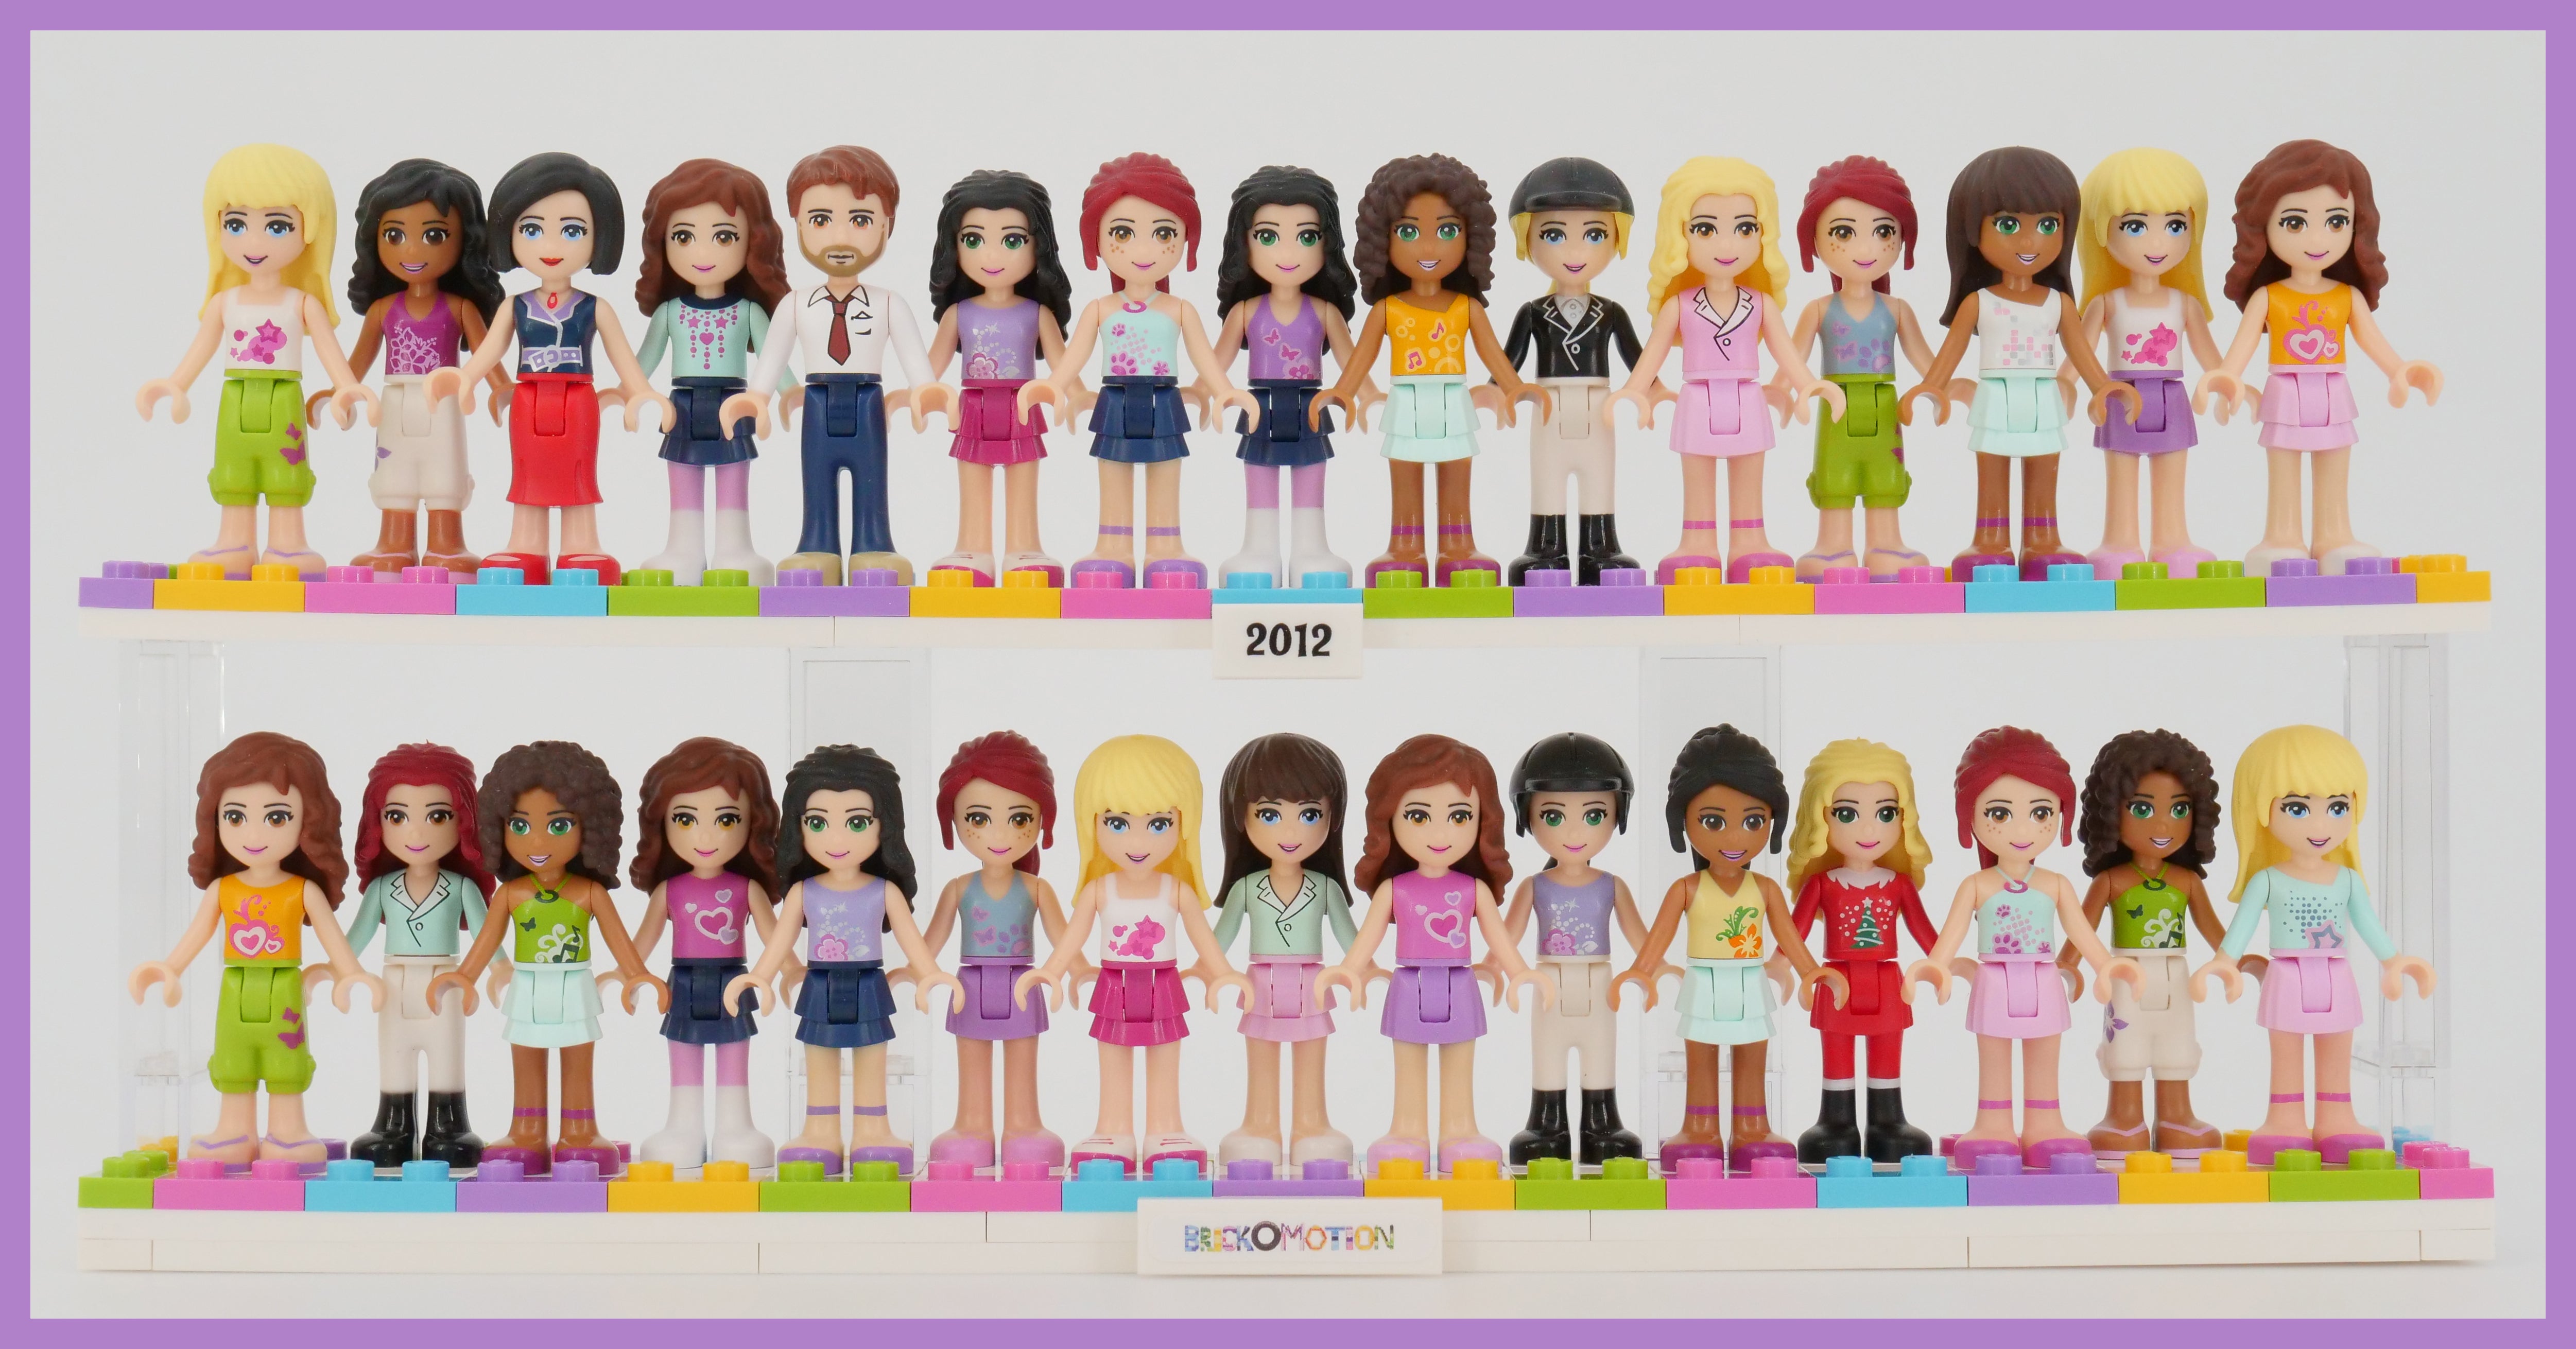 Lego Friends: It's Lego But, You Know, for Girls